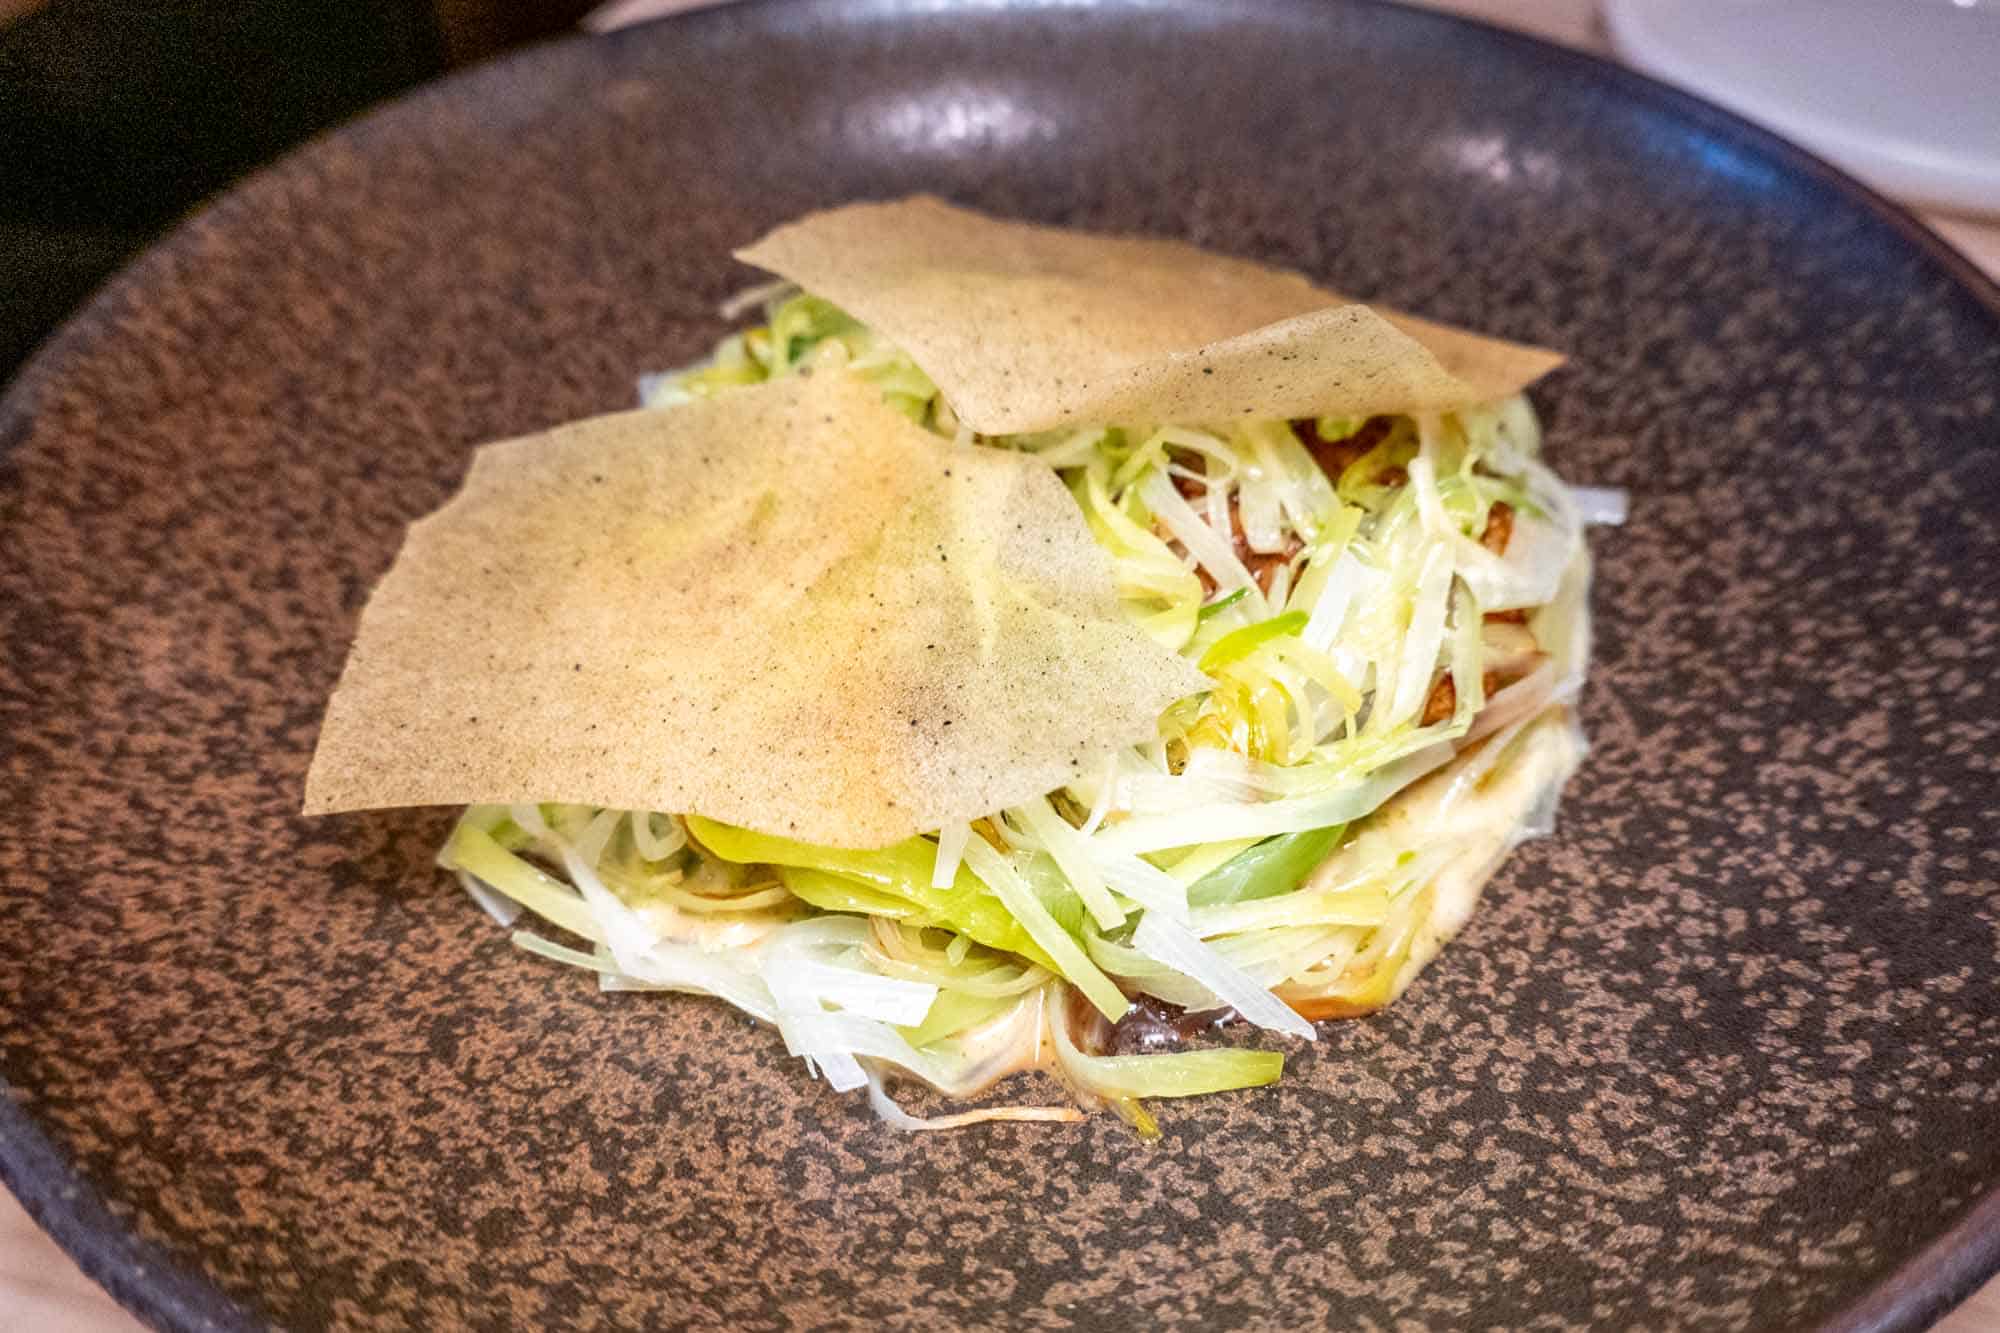 Filo dough chips covering shredded leeks and scallops